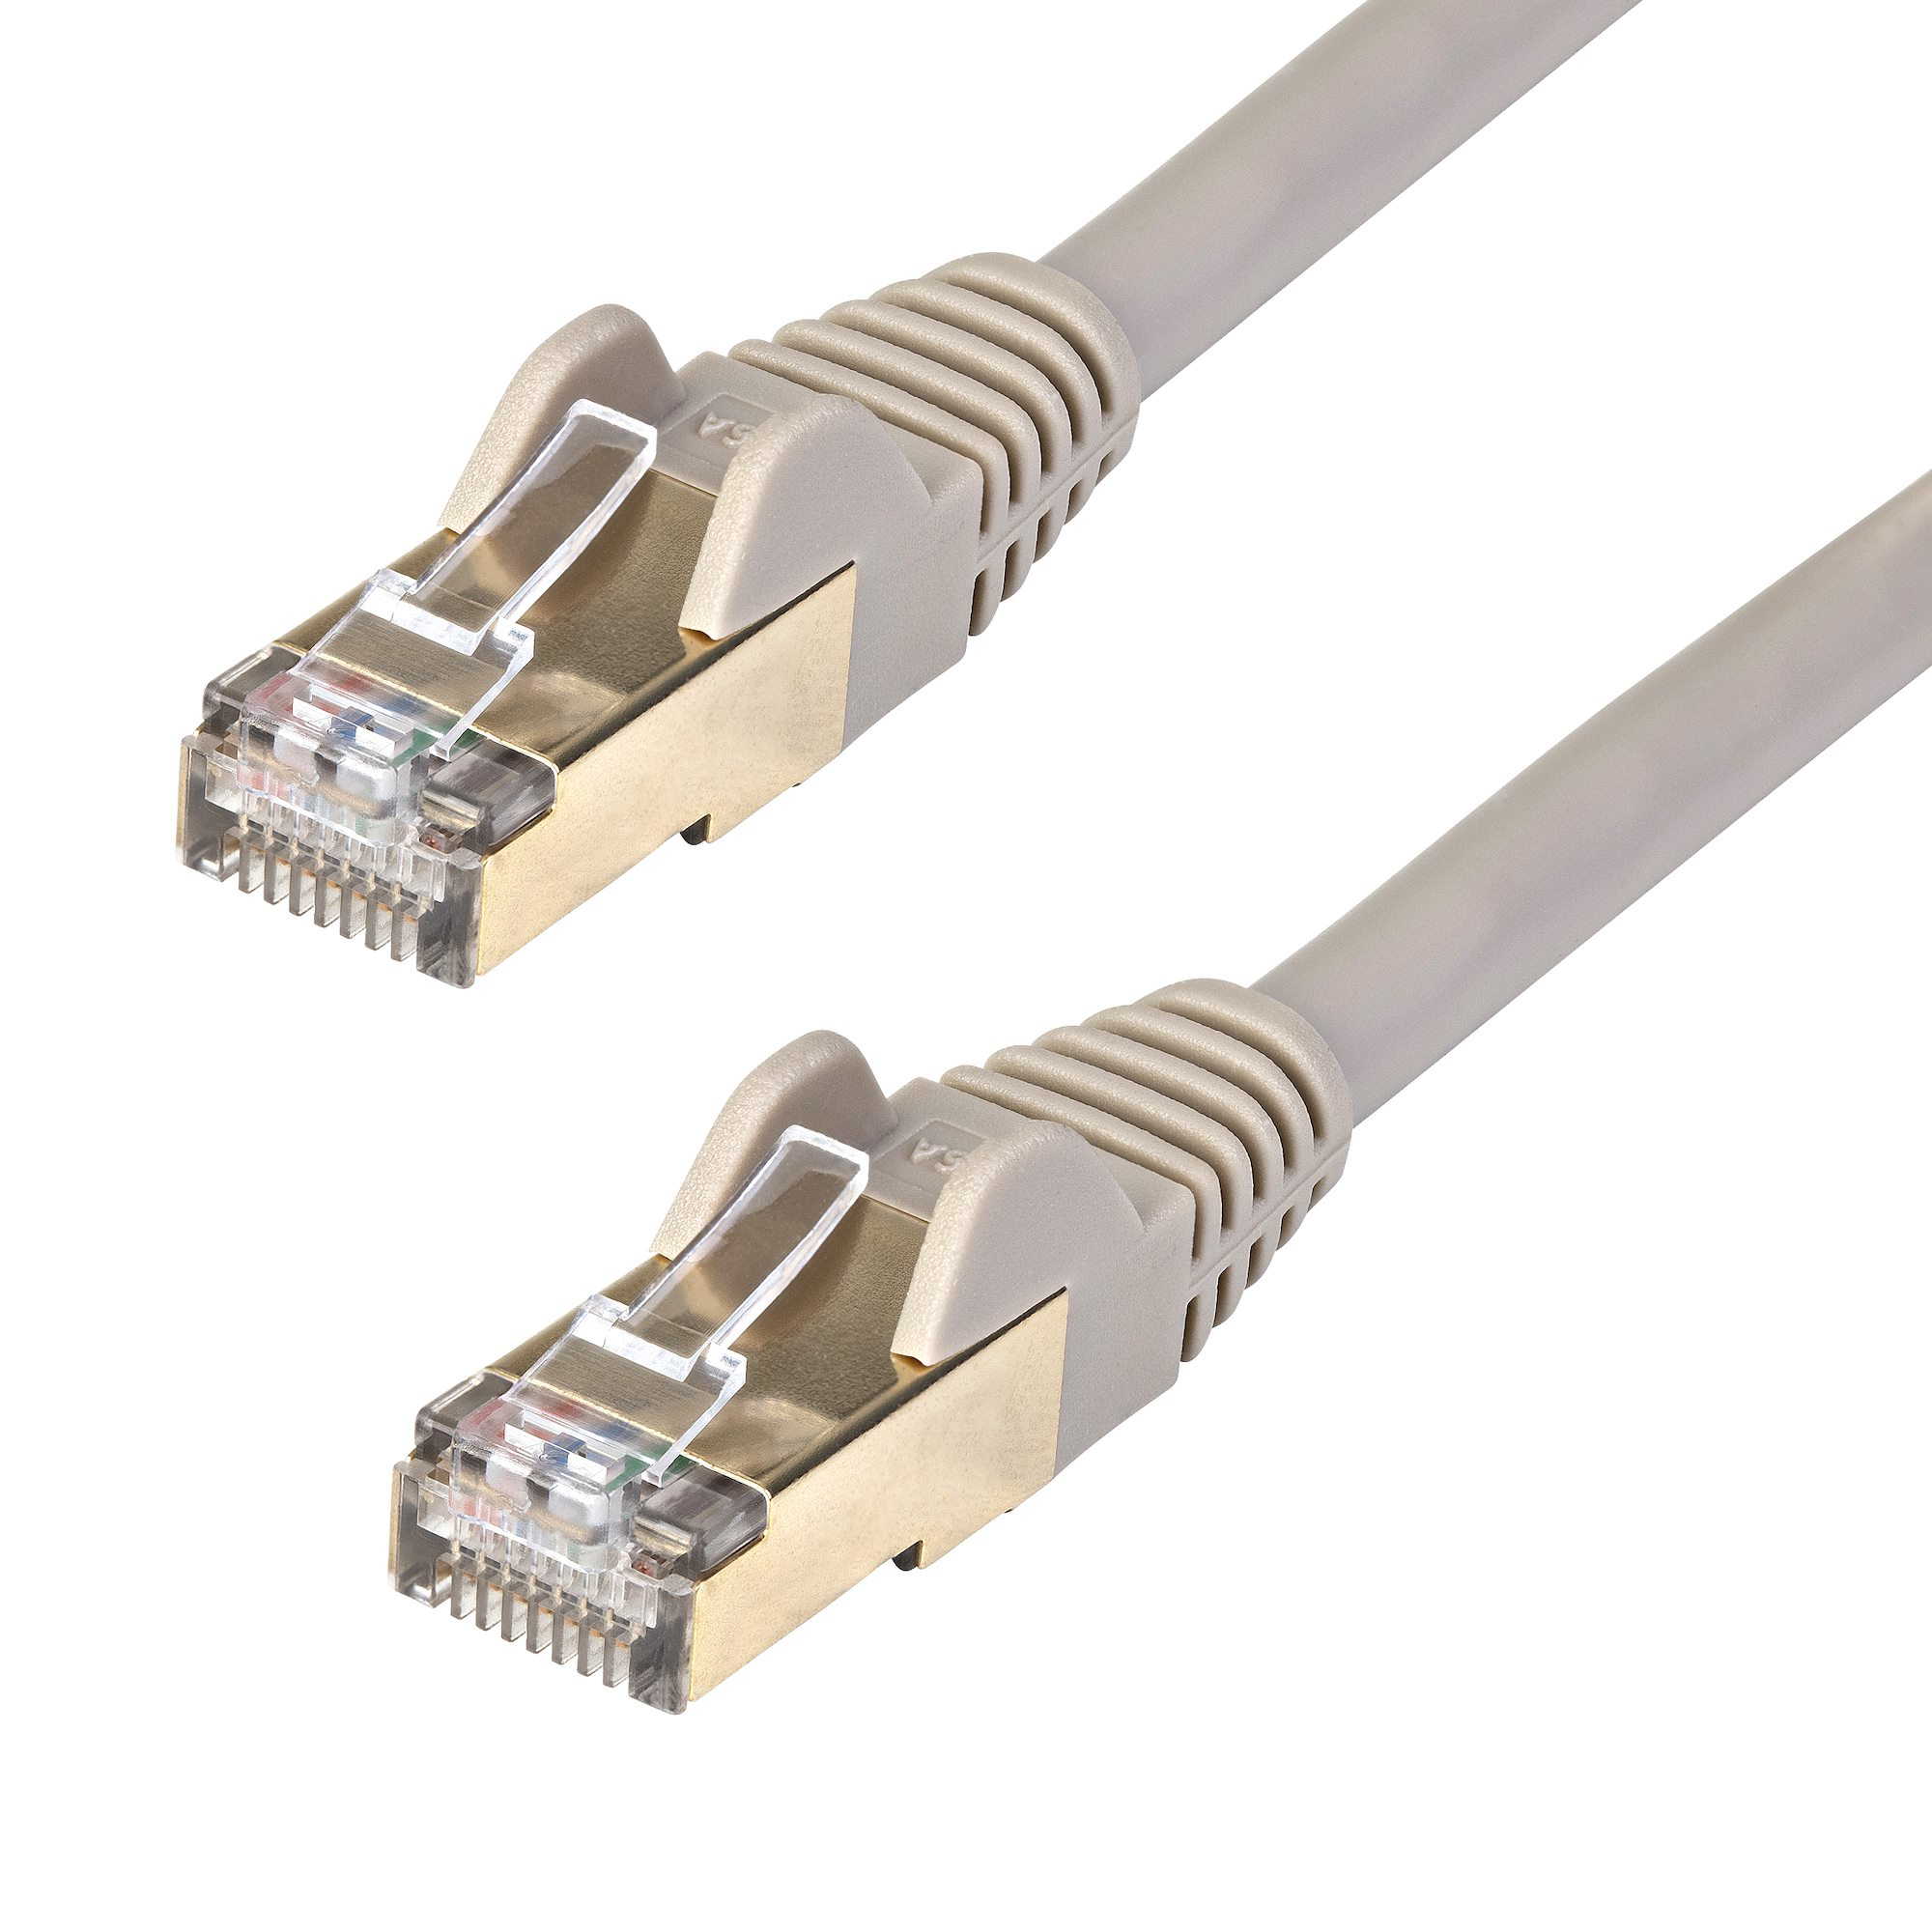 StarTech.com 7m CAT6A Ethernet Cable, 10 Gigabit Shielded Snagless RJ45 100W PoE Patch Cord, CAT 6A 10GbE STP Network Cable w/Strain Relief, Grey, Fluke Tested/UL Certified Wiring/TIA - Category 6A - 26AWG (6ASPAT7MGR)